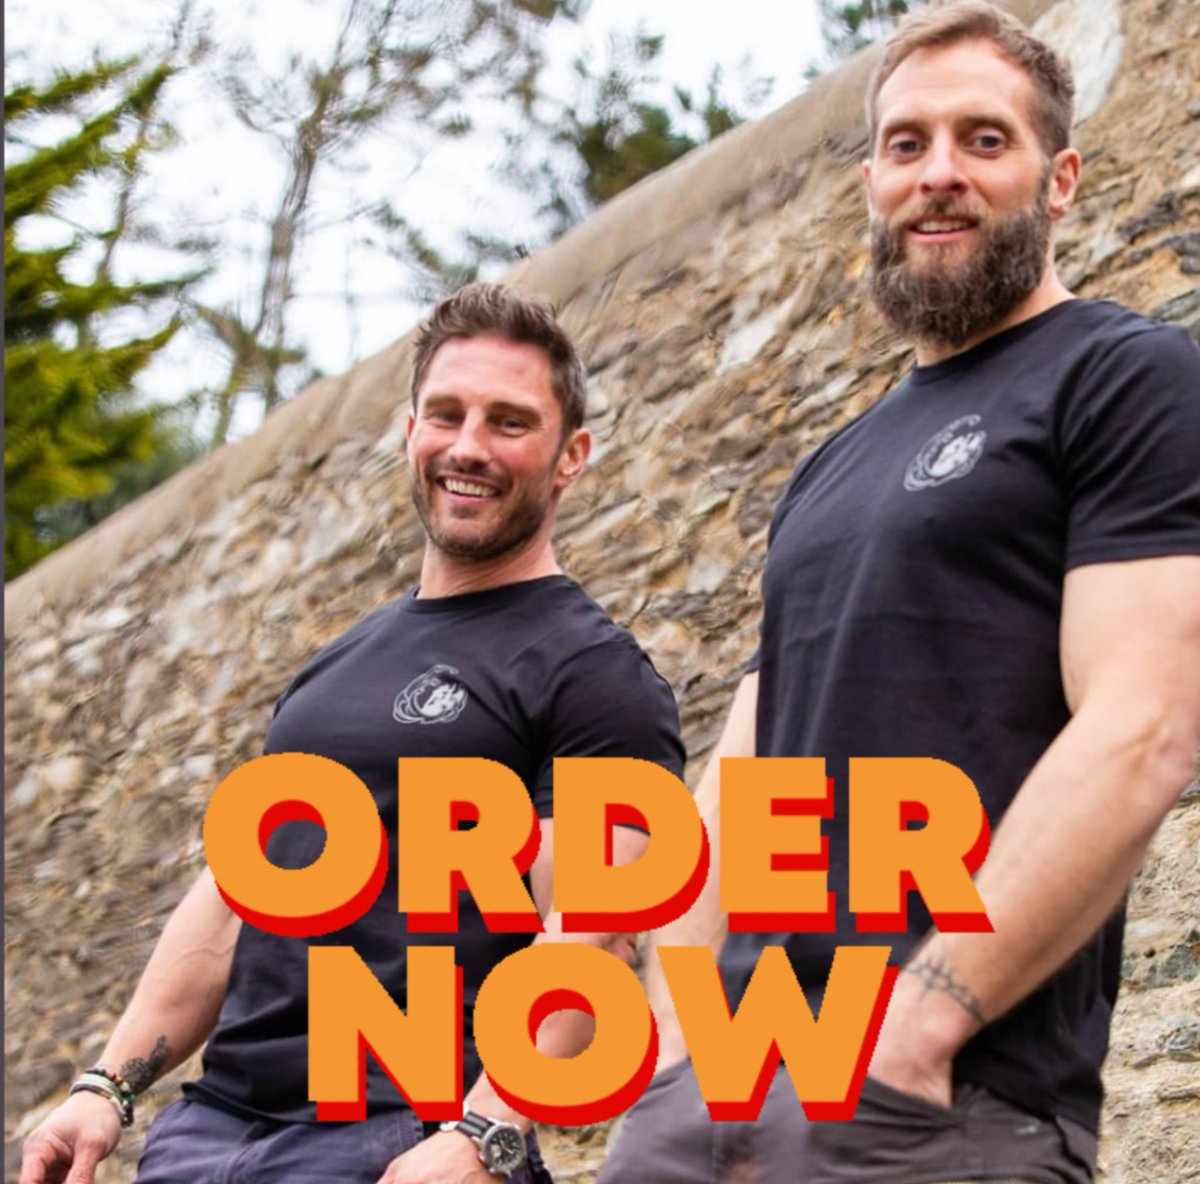 🙌🙌 ON SALE NOW! 🙌🙌 CLICK THE LINK TO GET YOURS NOW 👍 teamfortitude.uk WHICH WILL YOU WEAR? DETERMINED FOX 🦊 PEACEFUL BEAR 🐻 SLAY THE DRAGON 🐉 Don't forget to tag us in your pictures @teamfortituder2r 🙌 £10 from each sale goes directly to @rock2recoveryuk